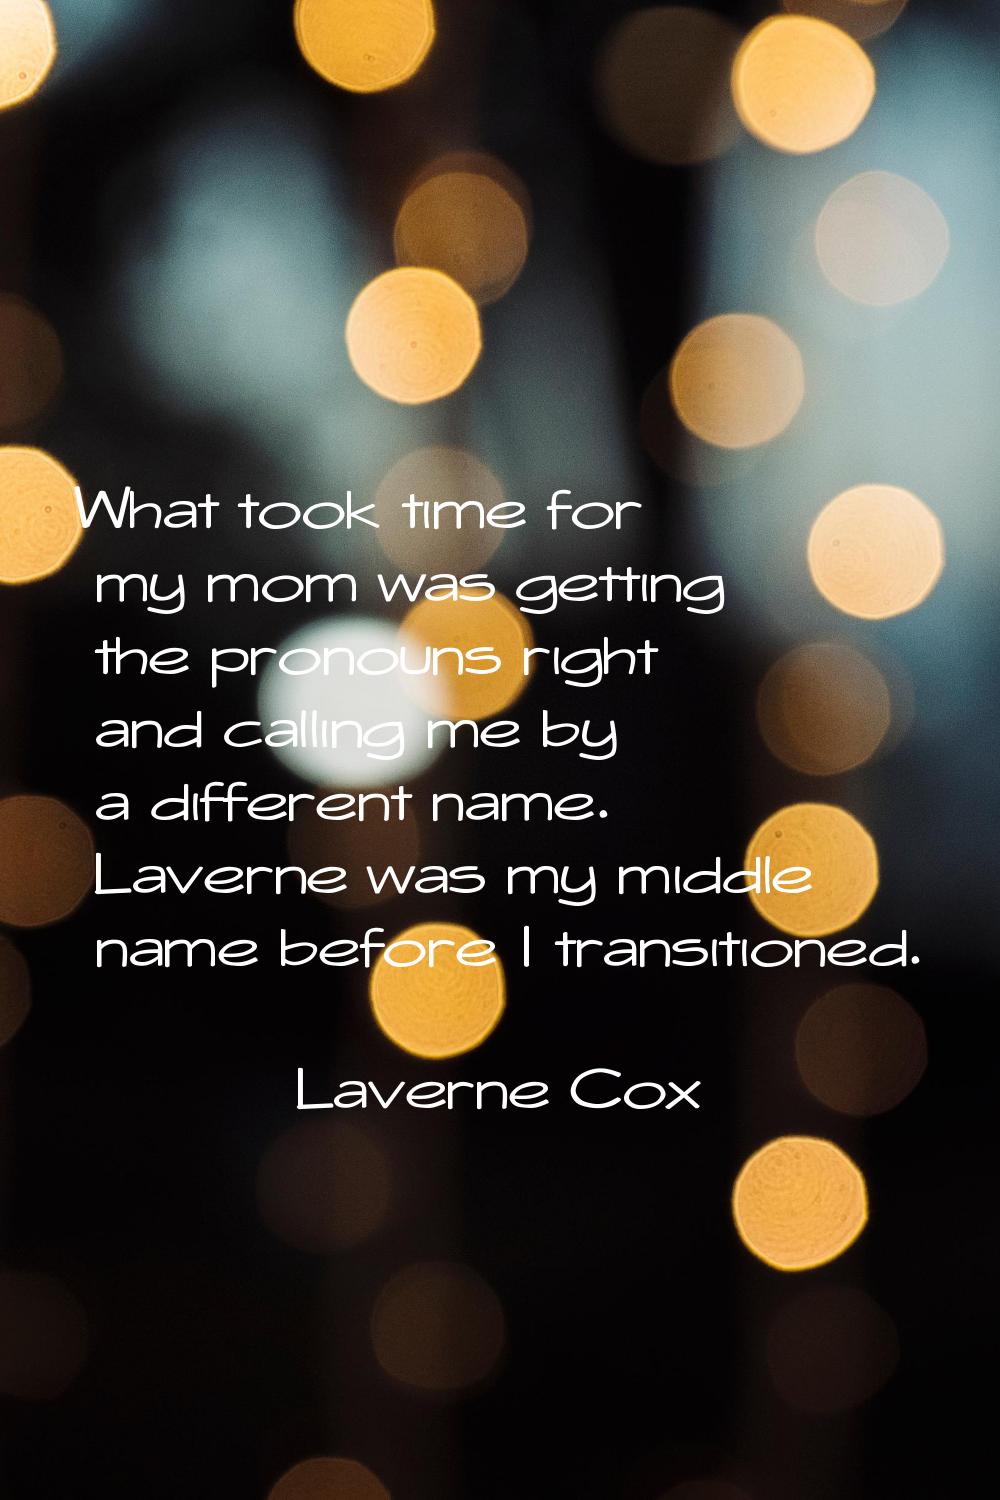 What took time for my mom was getting the pronouns right and calling me by a different name. Lavern